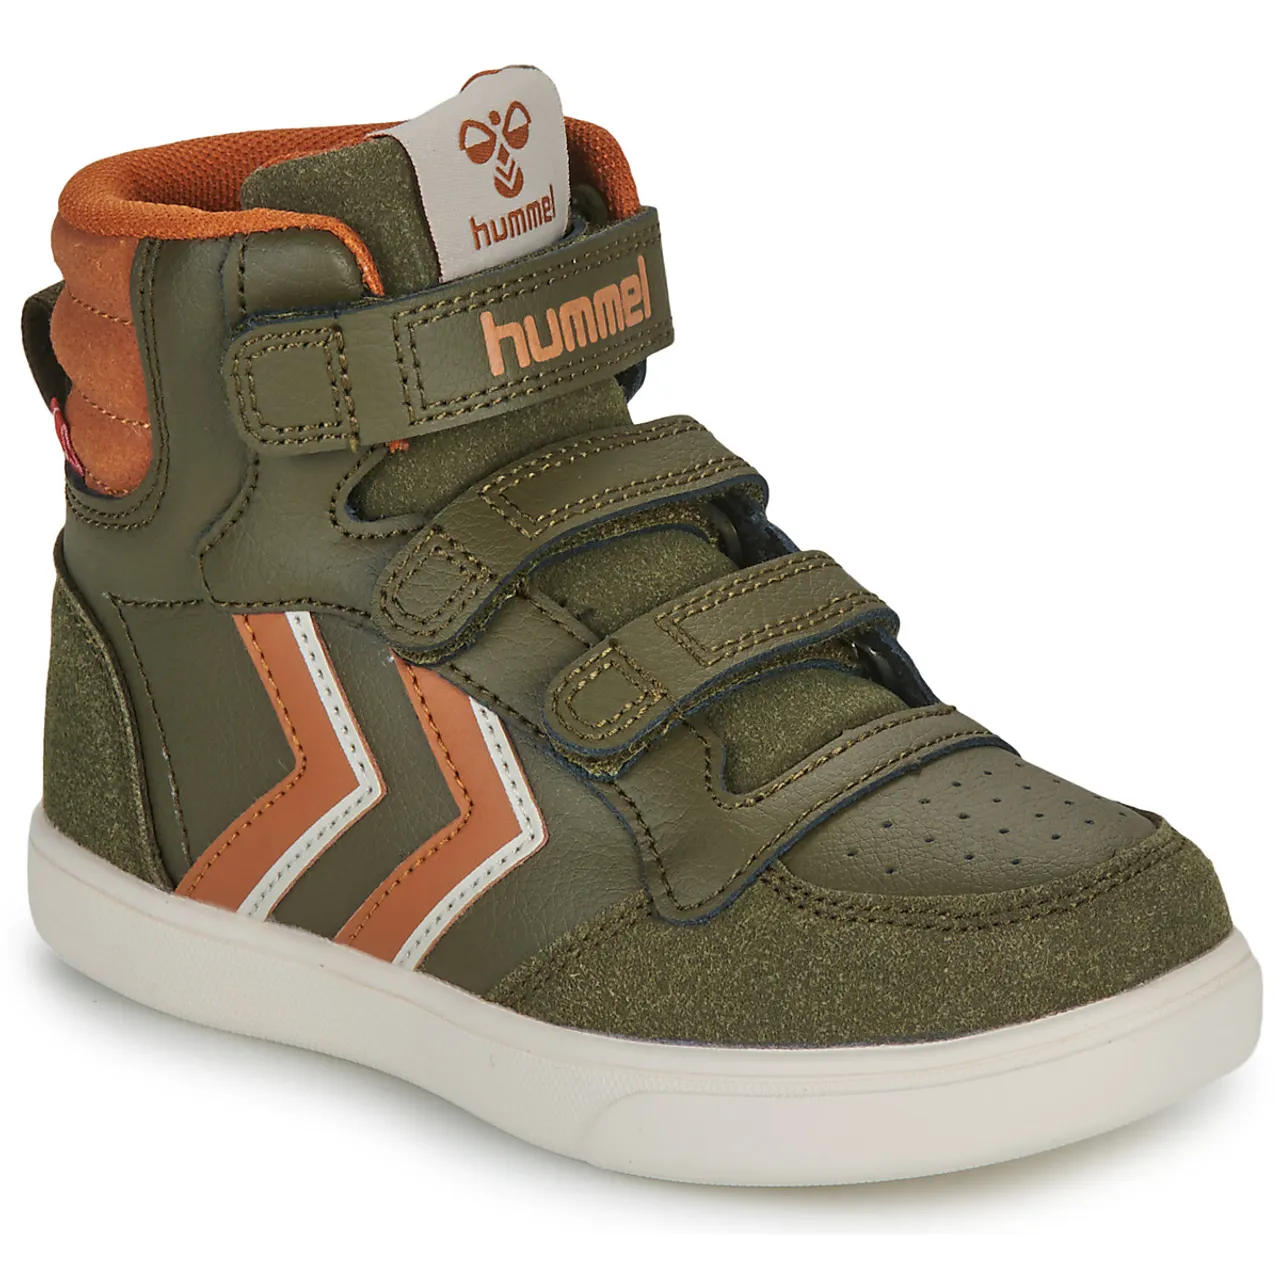 hummel  STADIL PRO JR  boys's Children's Shoes (High-top Trainers) in Green